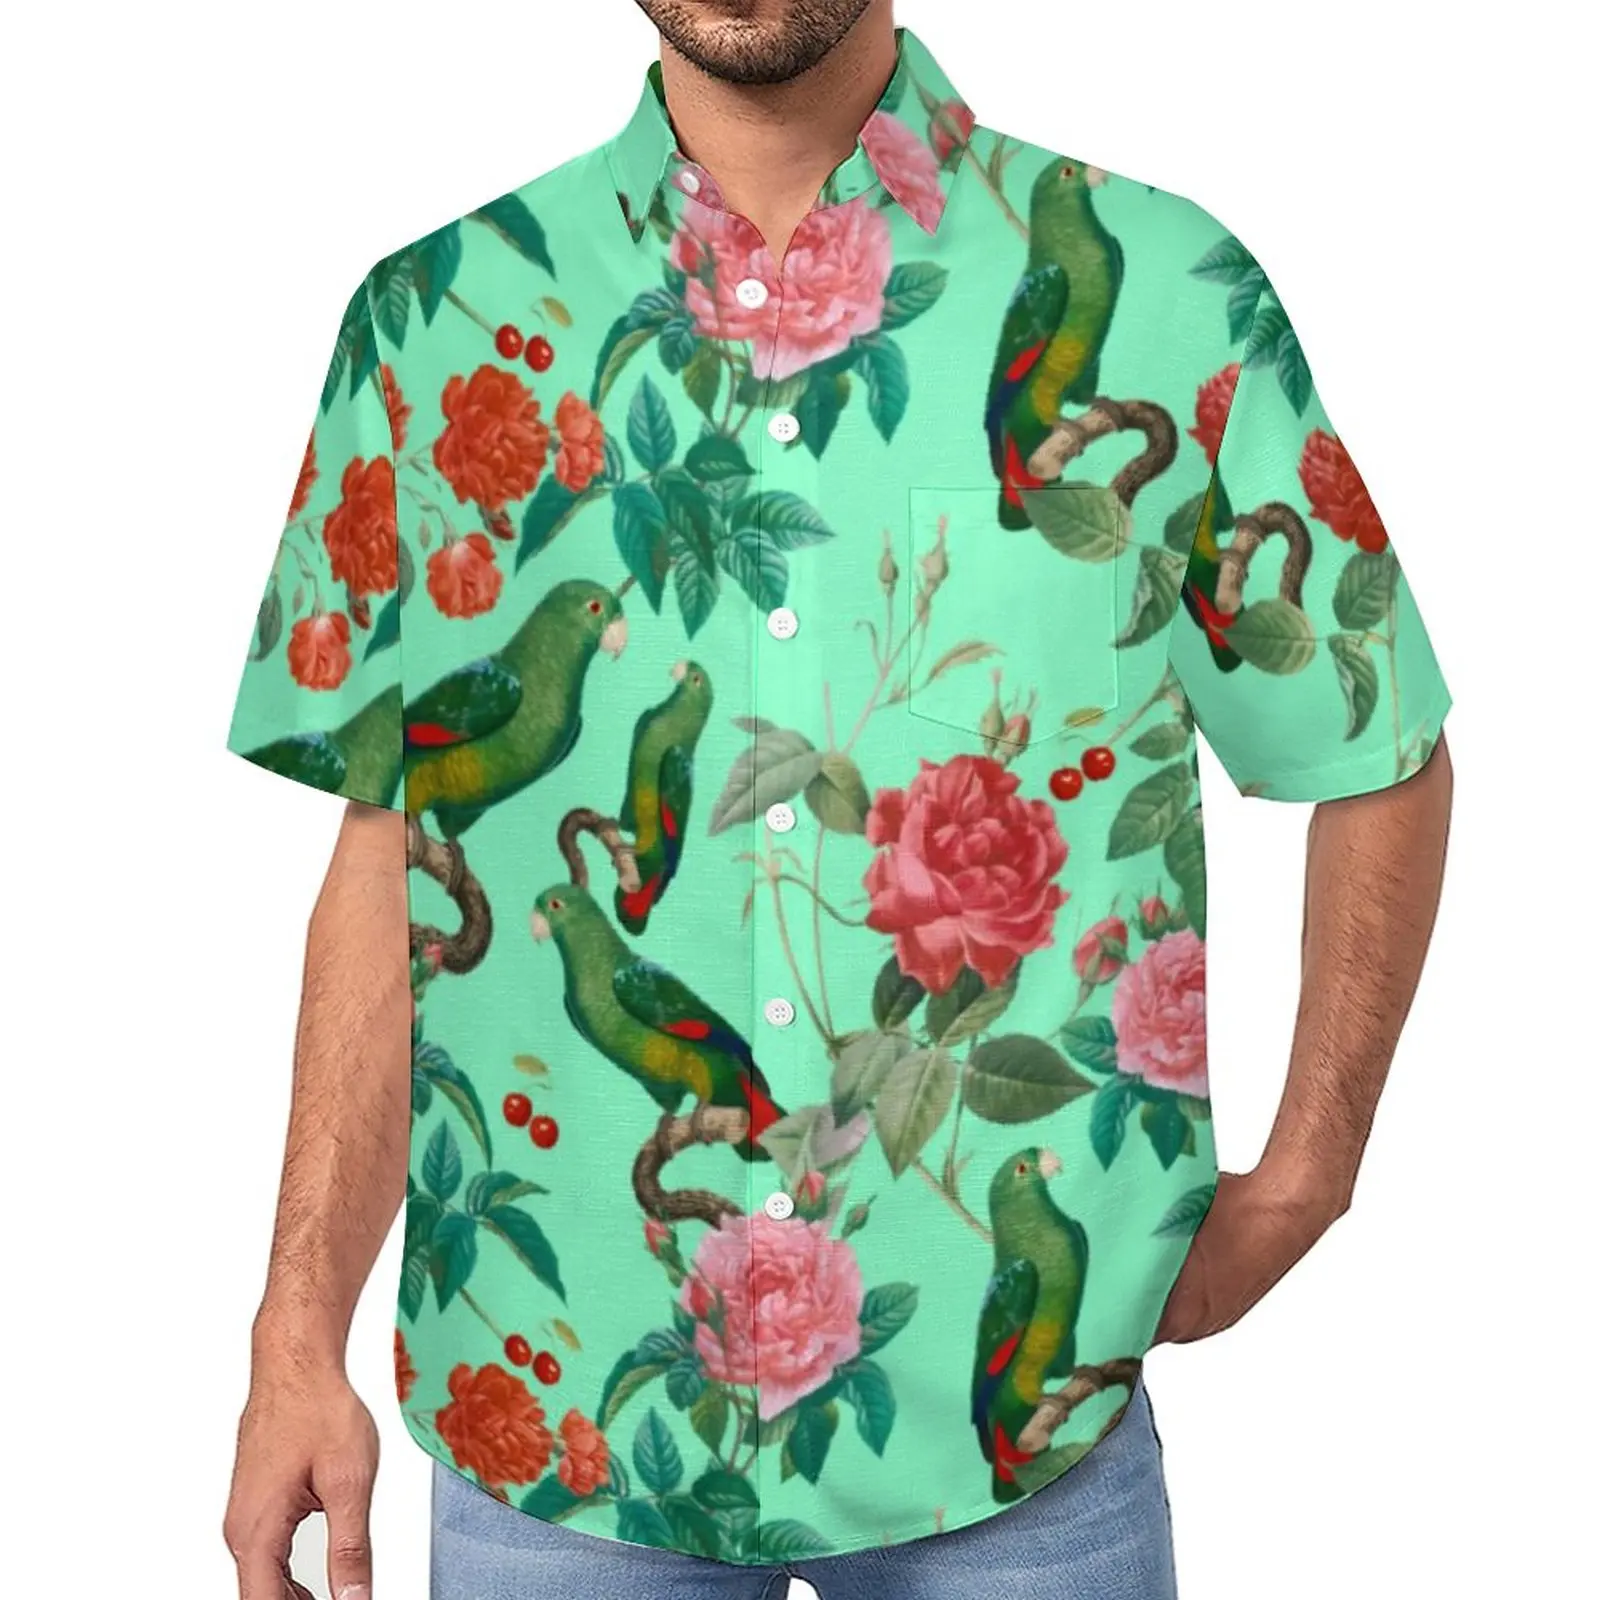 

Parrot Pattern Blouses Man Red Pink Roses Casual Shirts Hawaii Short Sleeve Design Retro Oversize Vacation Shirt Birthday Gift